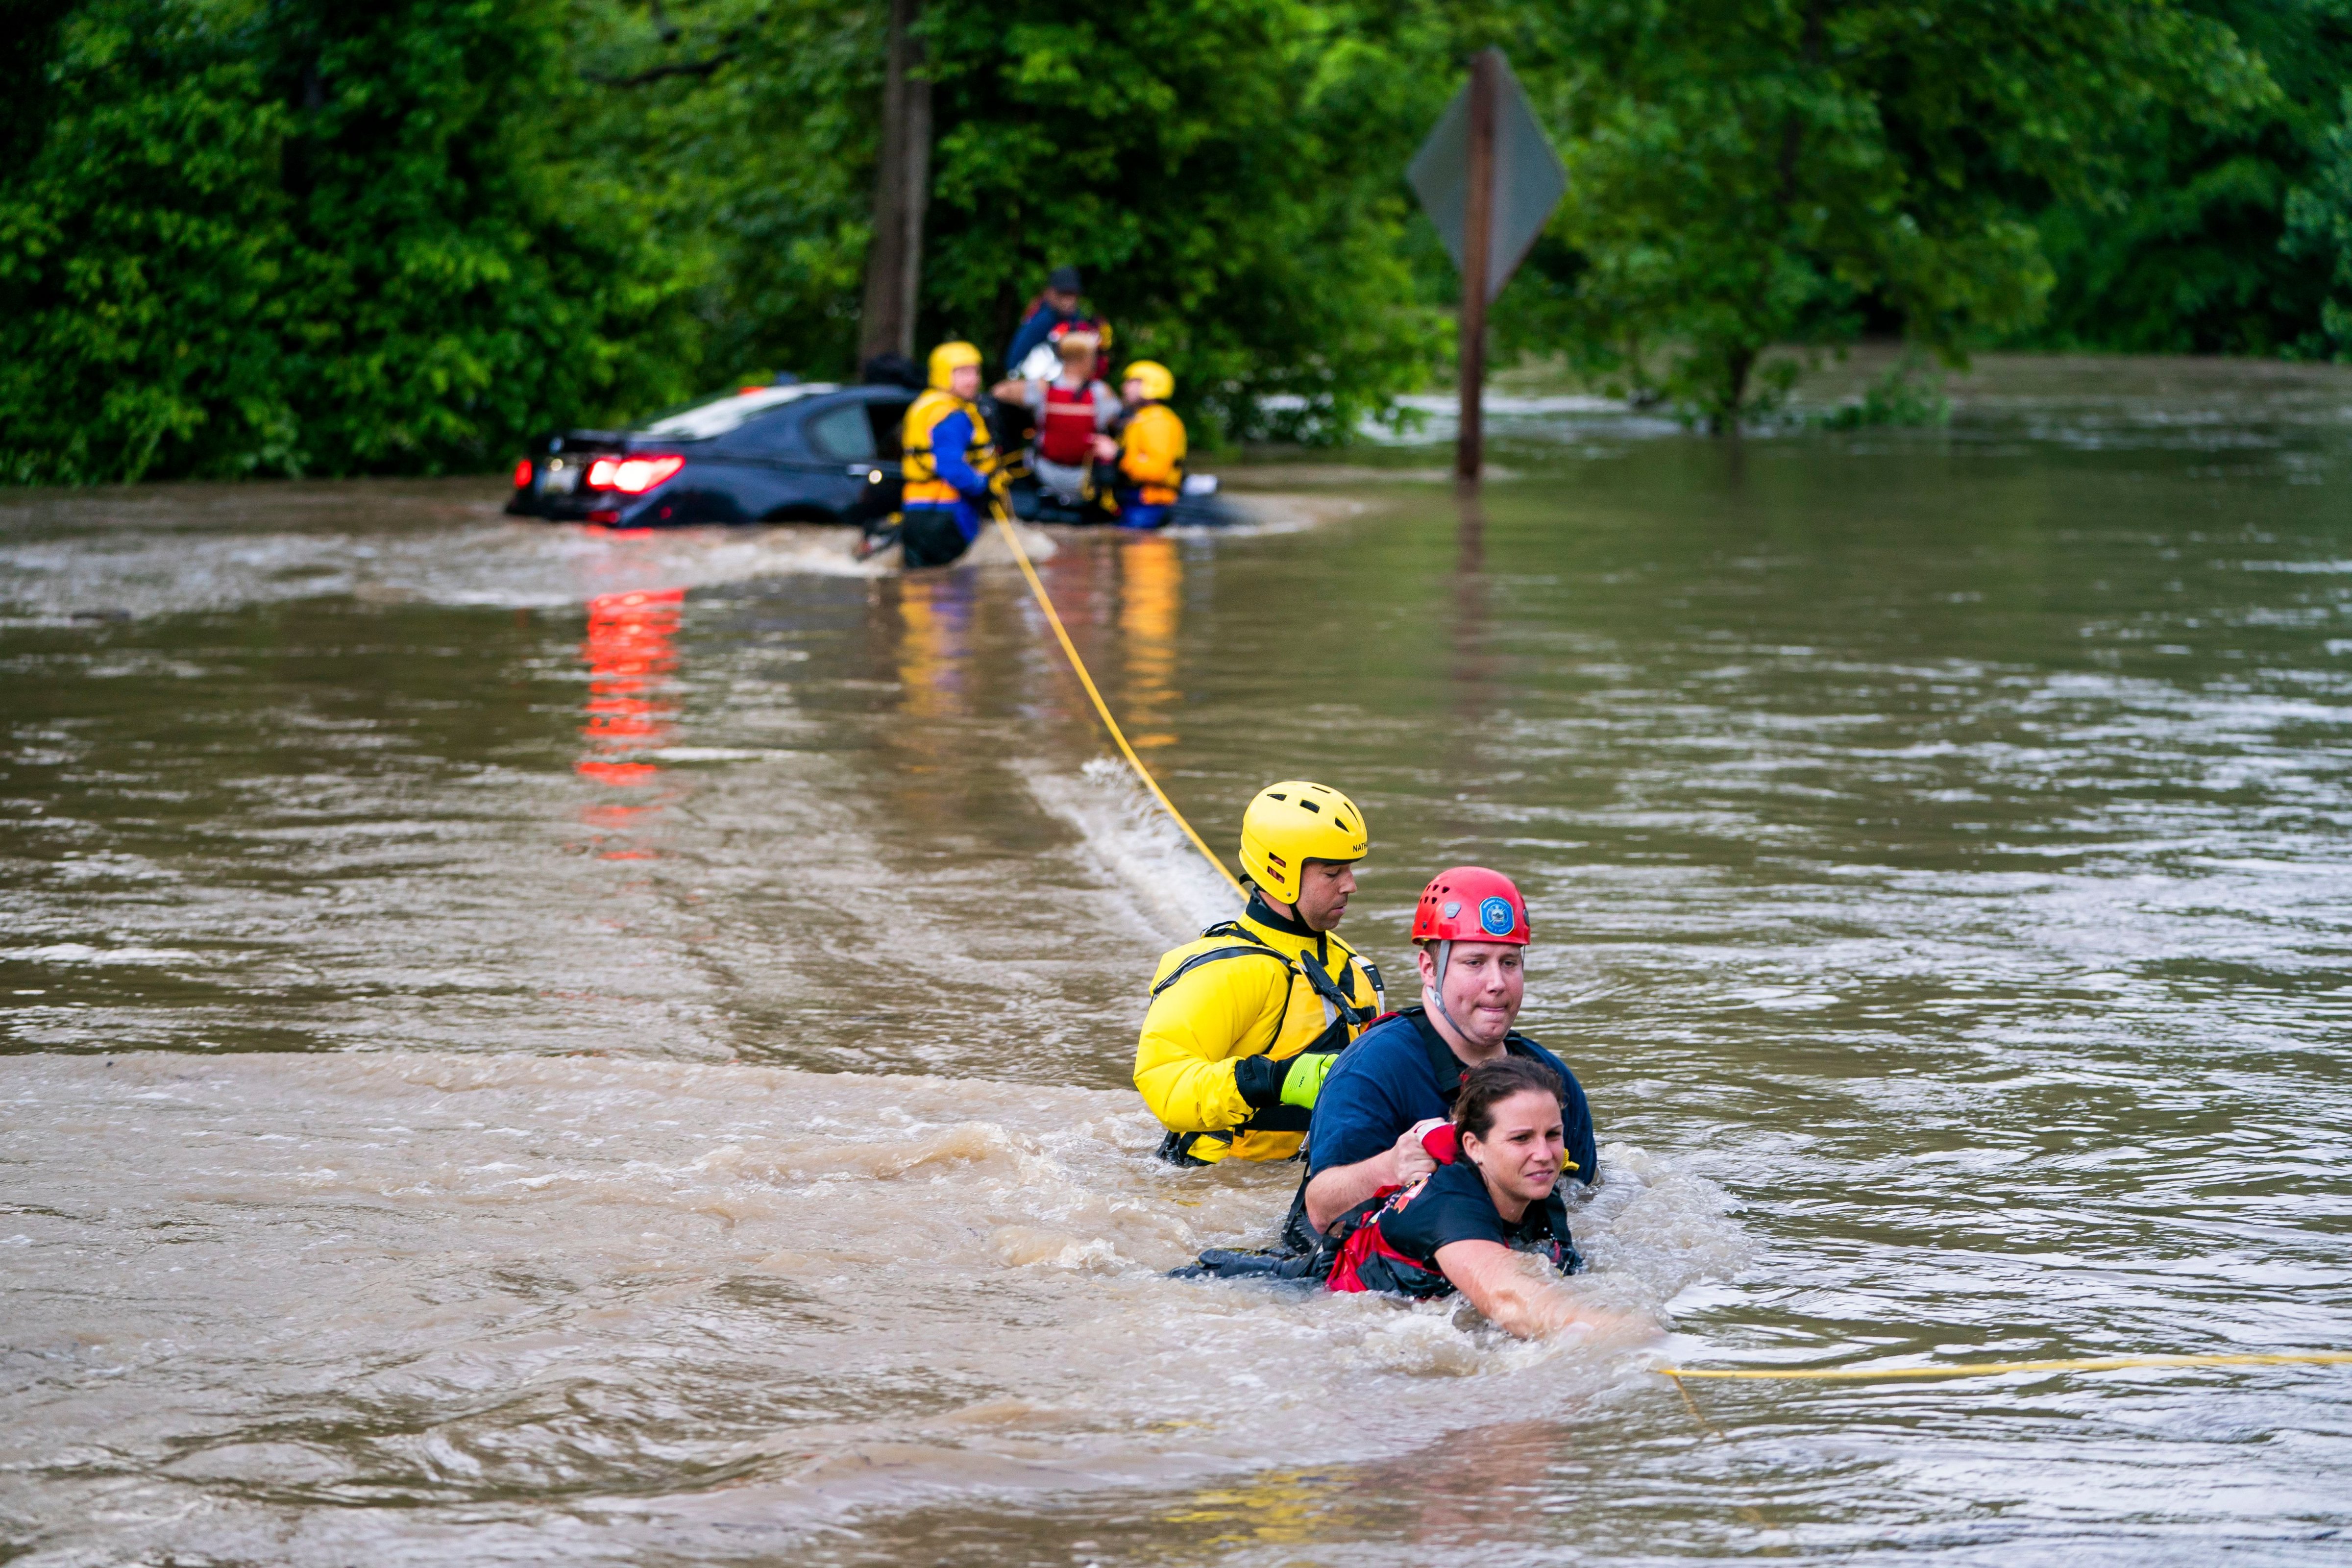 Commuters are rescued from a flooded car on Columbia Pike after a flash flood in Oakland Mills, Maryland, USA, 27 May 2018. The National Weather Service stated as much as 9.5 inches of rain fell in the area. Flash floods ravage Maryland, Oakland Mills, USA - 27 May 2018 (JIM LO SCALZO—EPA-EFE/REX/Shutterstock)